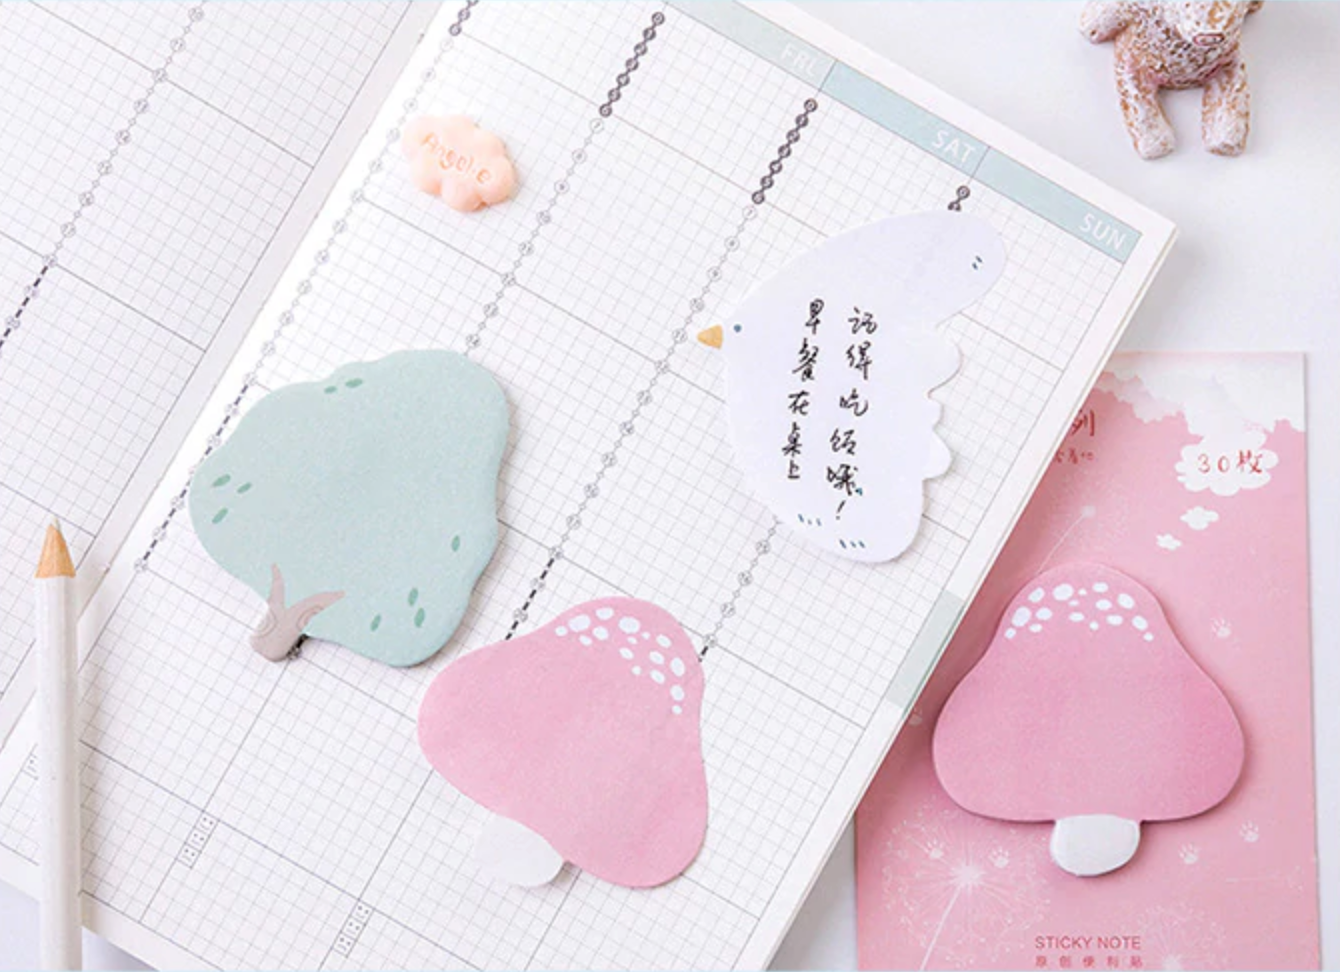 2PCS Sticky Notes, Deli Self-Stick Notes Pastel Color, 100 Sheets/Pads  Pastel School Supplies Post It Notes 